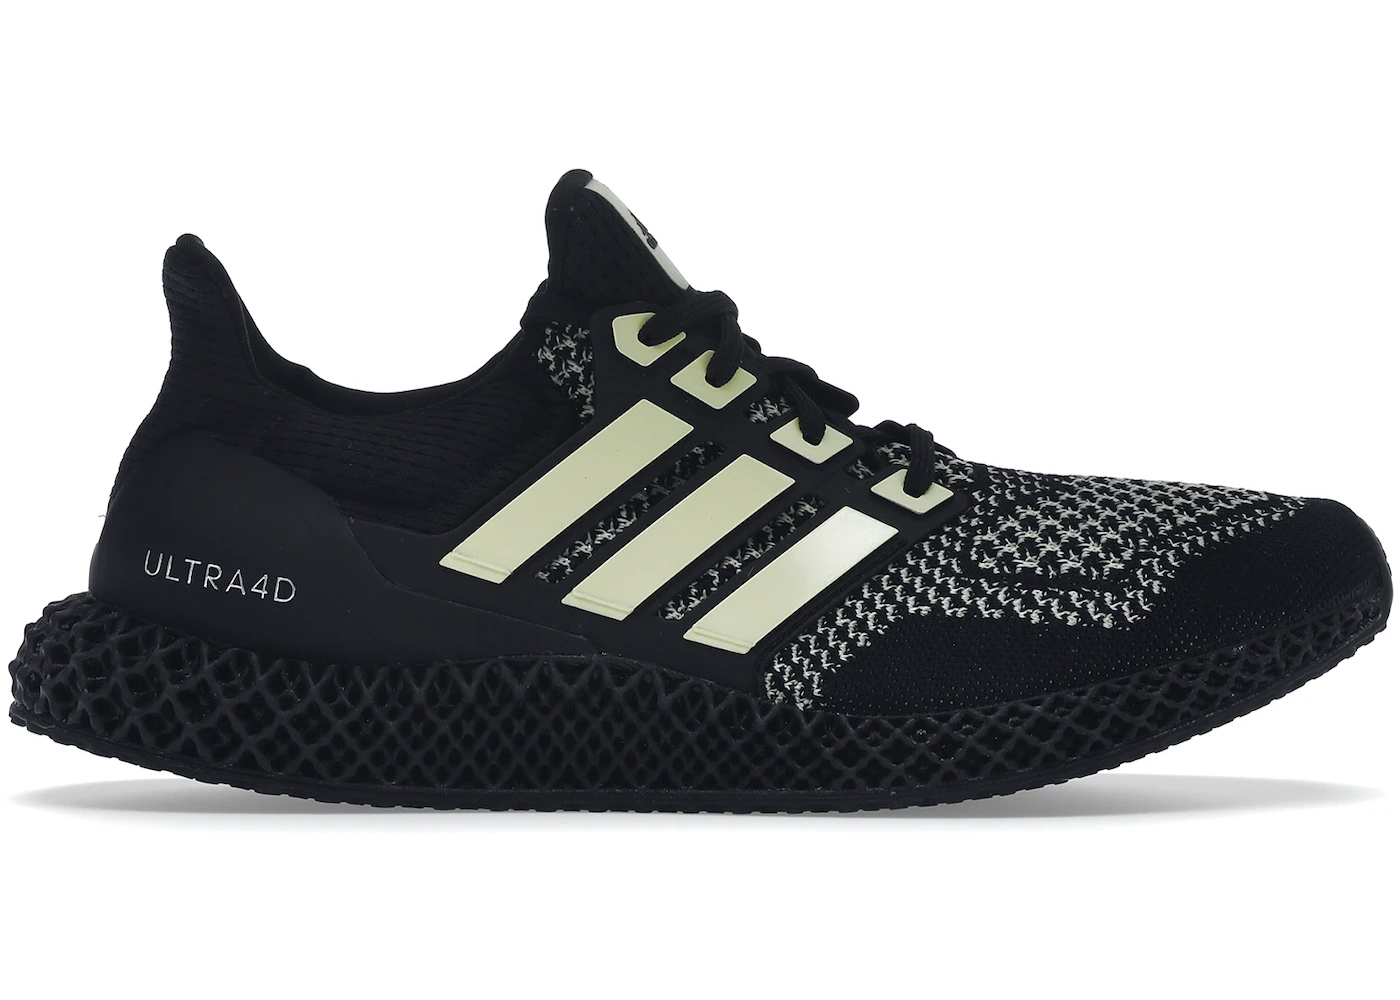 adidas Ultra 4D Black Almost Lime Men's - GZ4499 - US